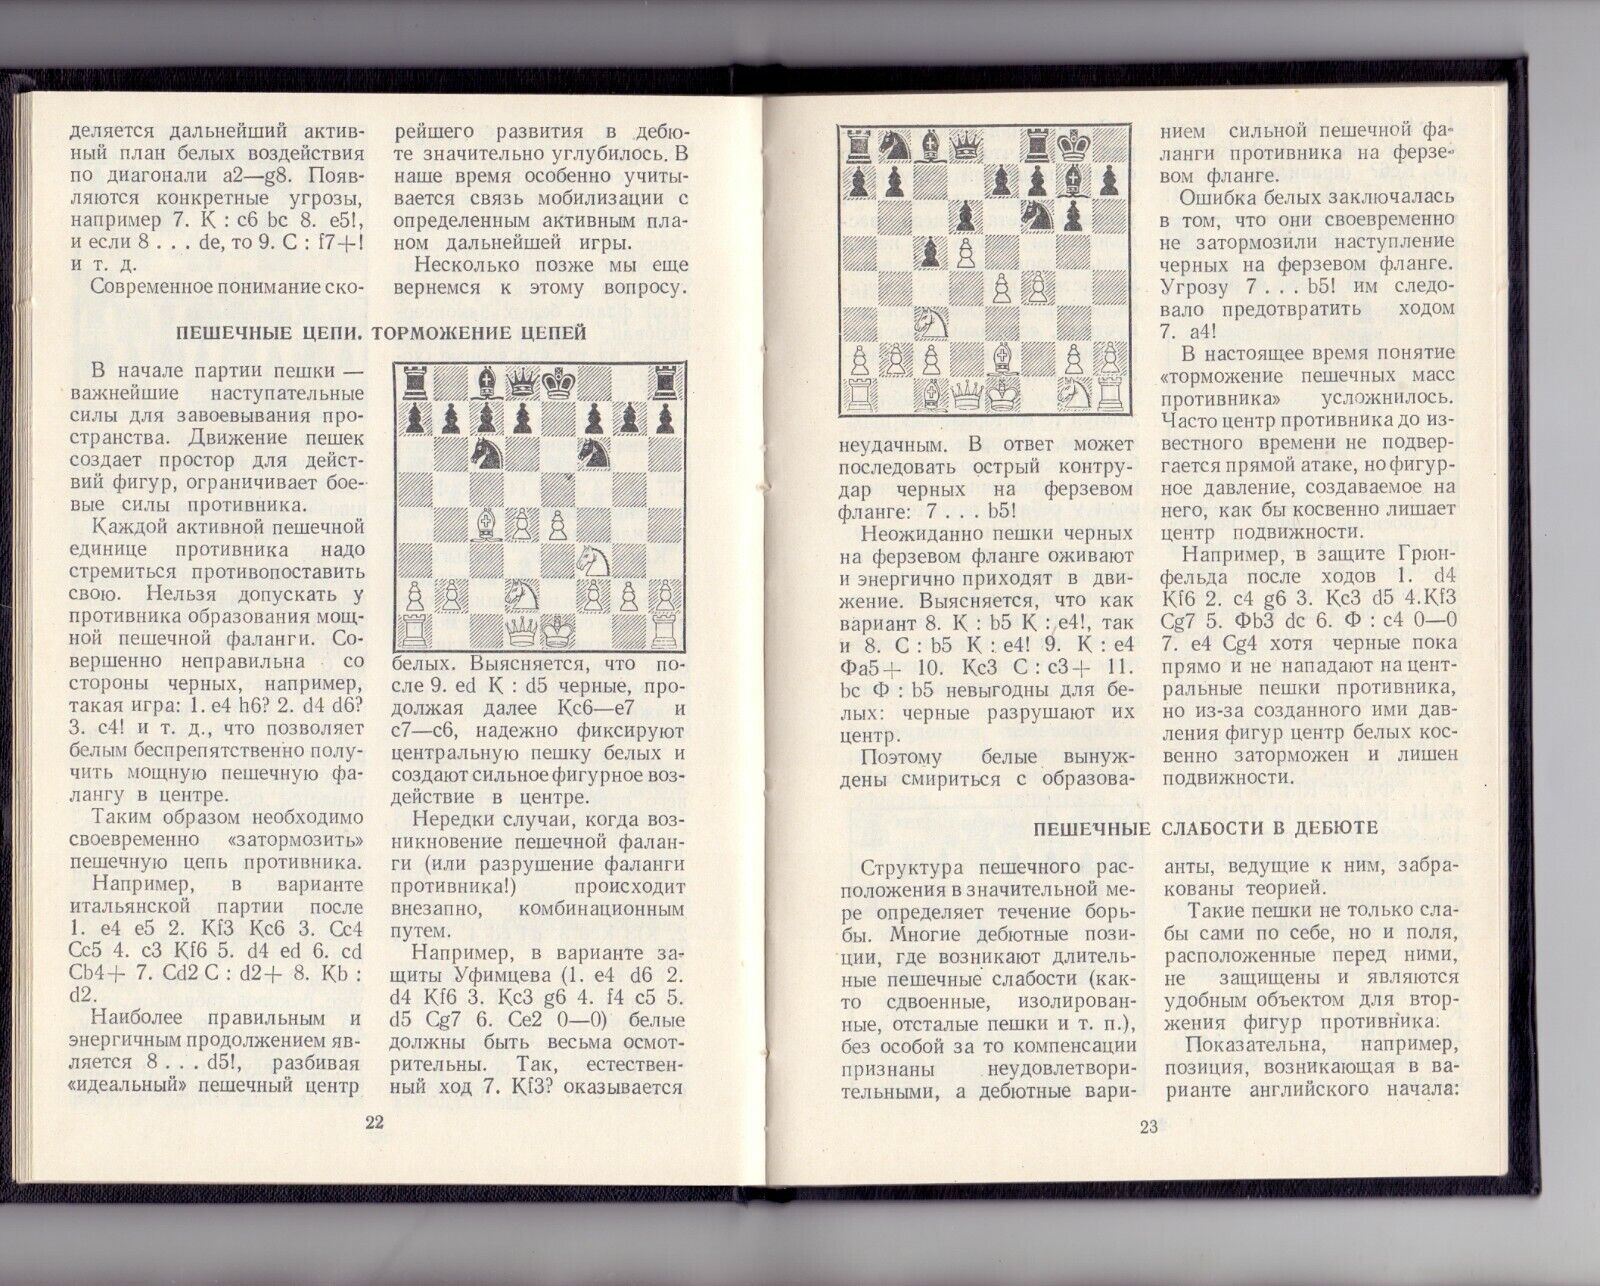 10965.Book signed by Suetin. How to play debut. 1960. Baturinsky-Karpov library